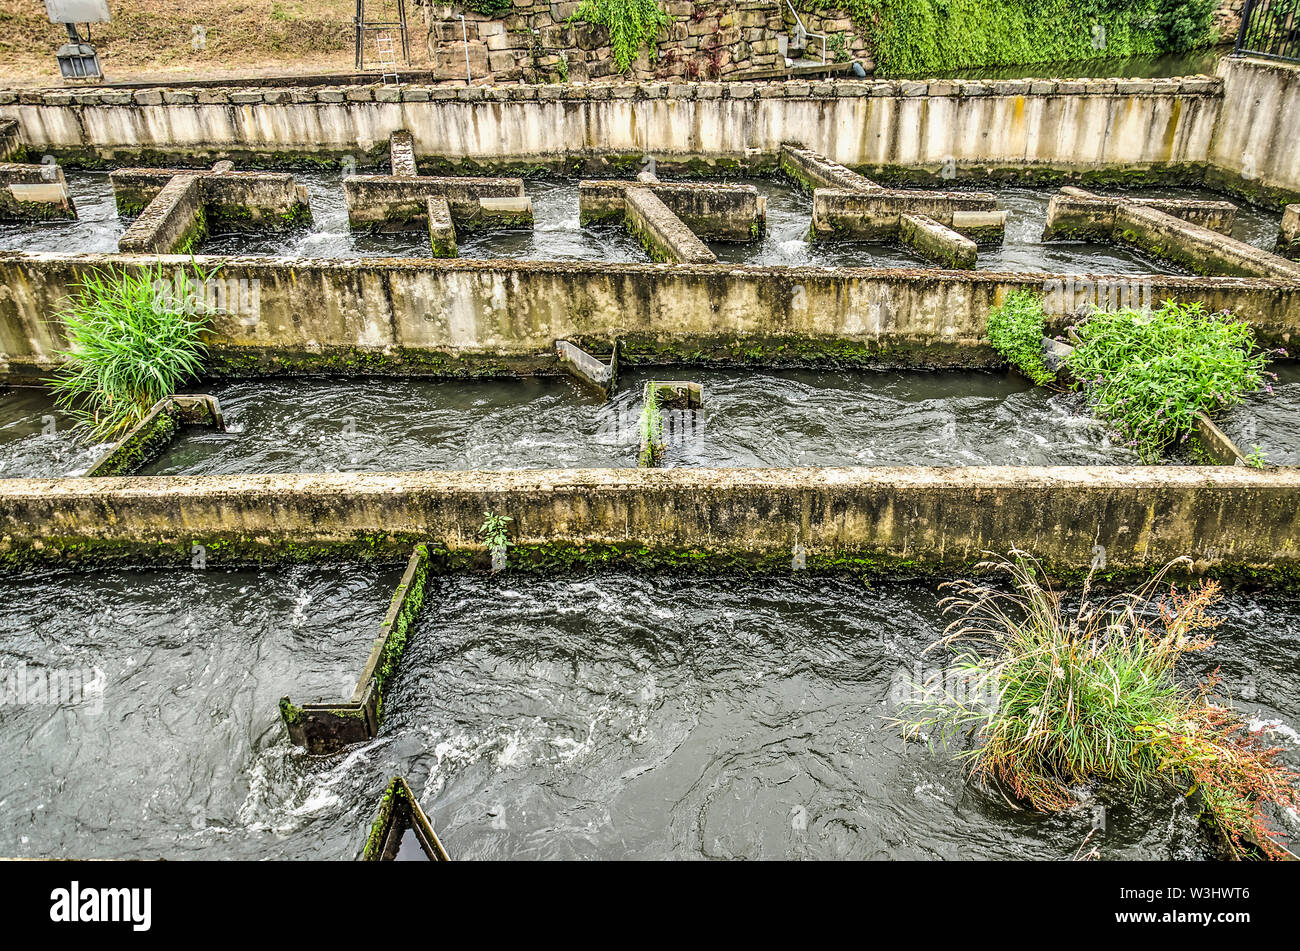 Concrete fish ladder in the river Roer in Roermond, The Netherlands, partly covered with moss, grasses and small shrubs Stock Photo